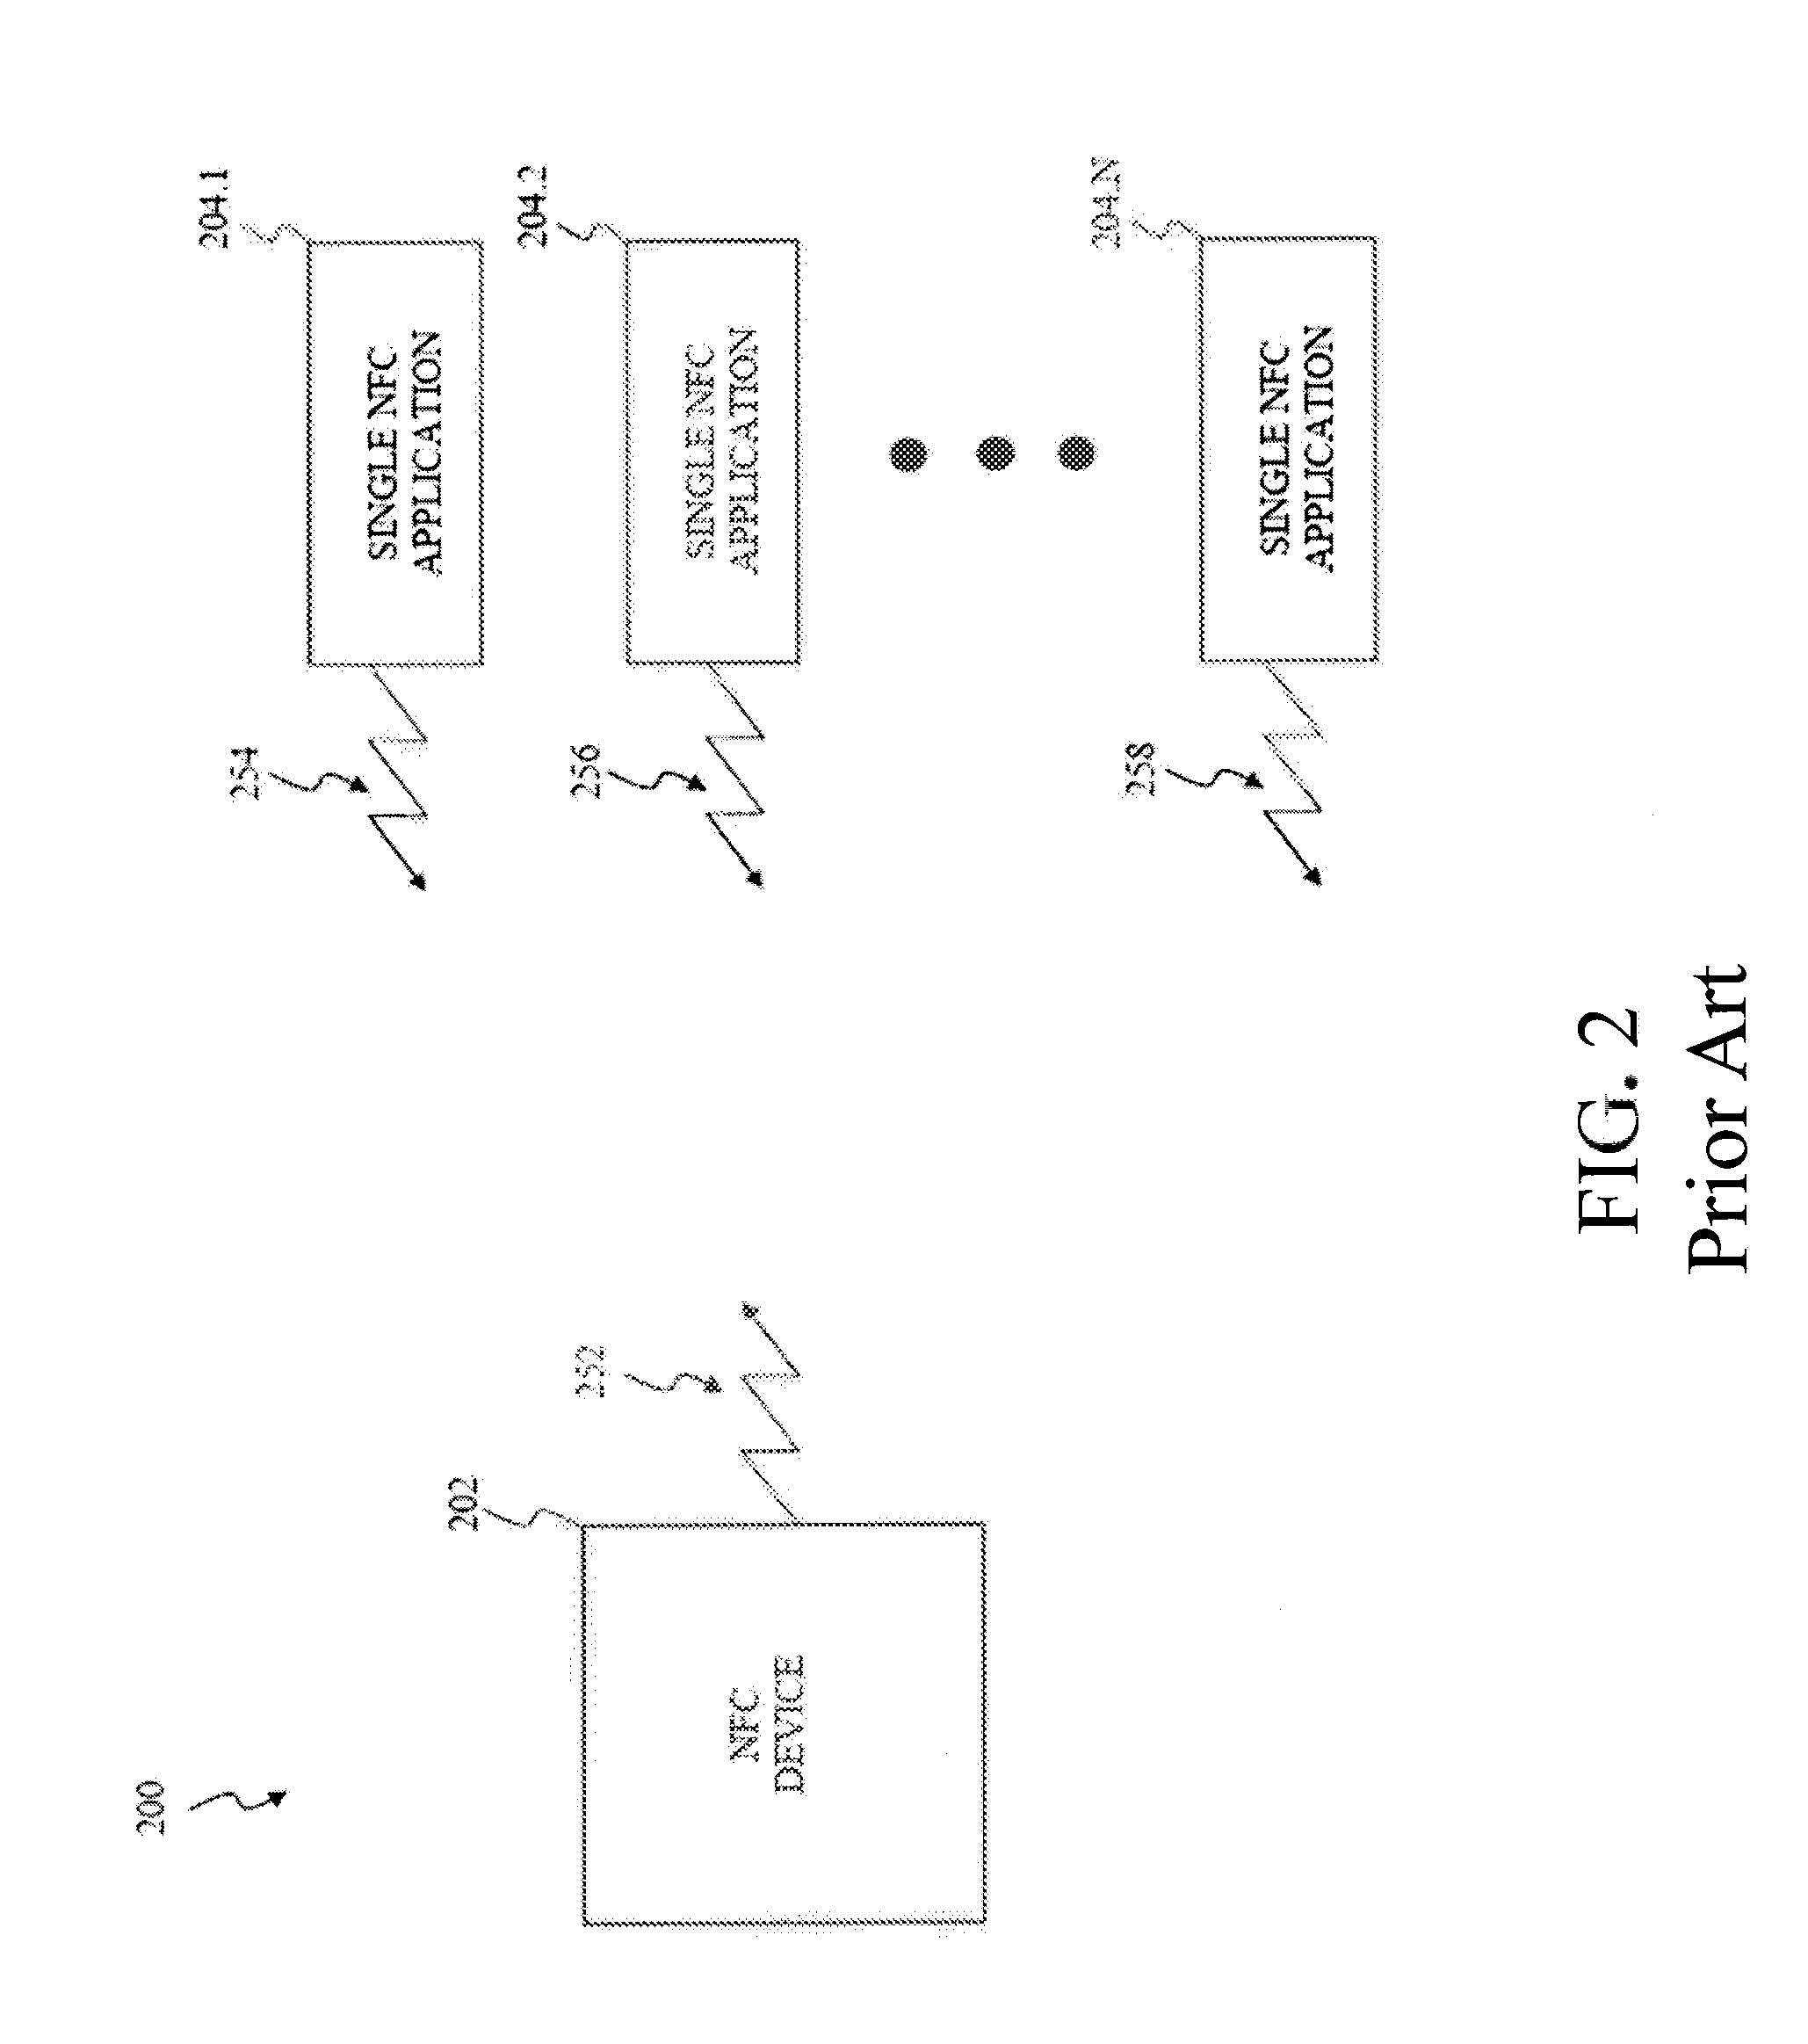 Systems and Methods for Providing NFC Secure Application Support in Battery On and Battery Off Modes